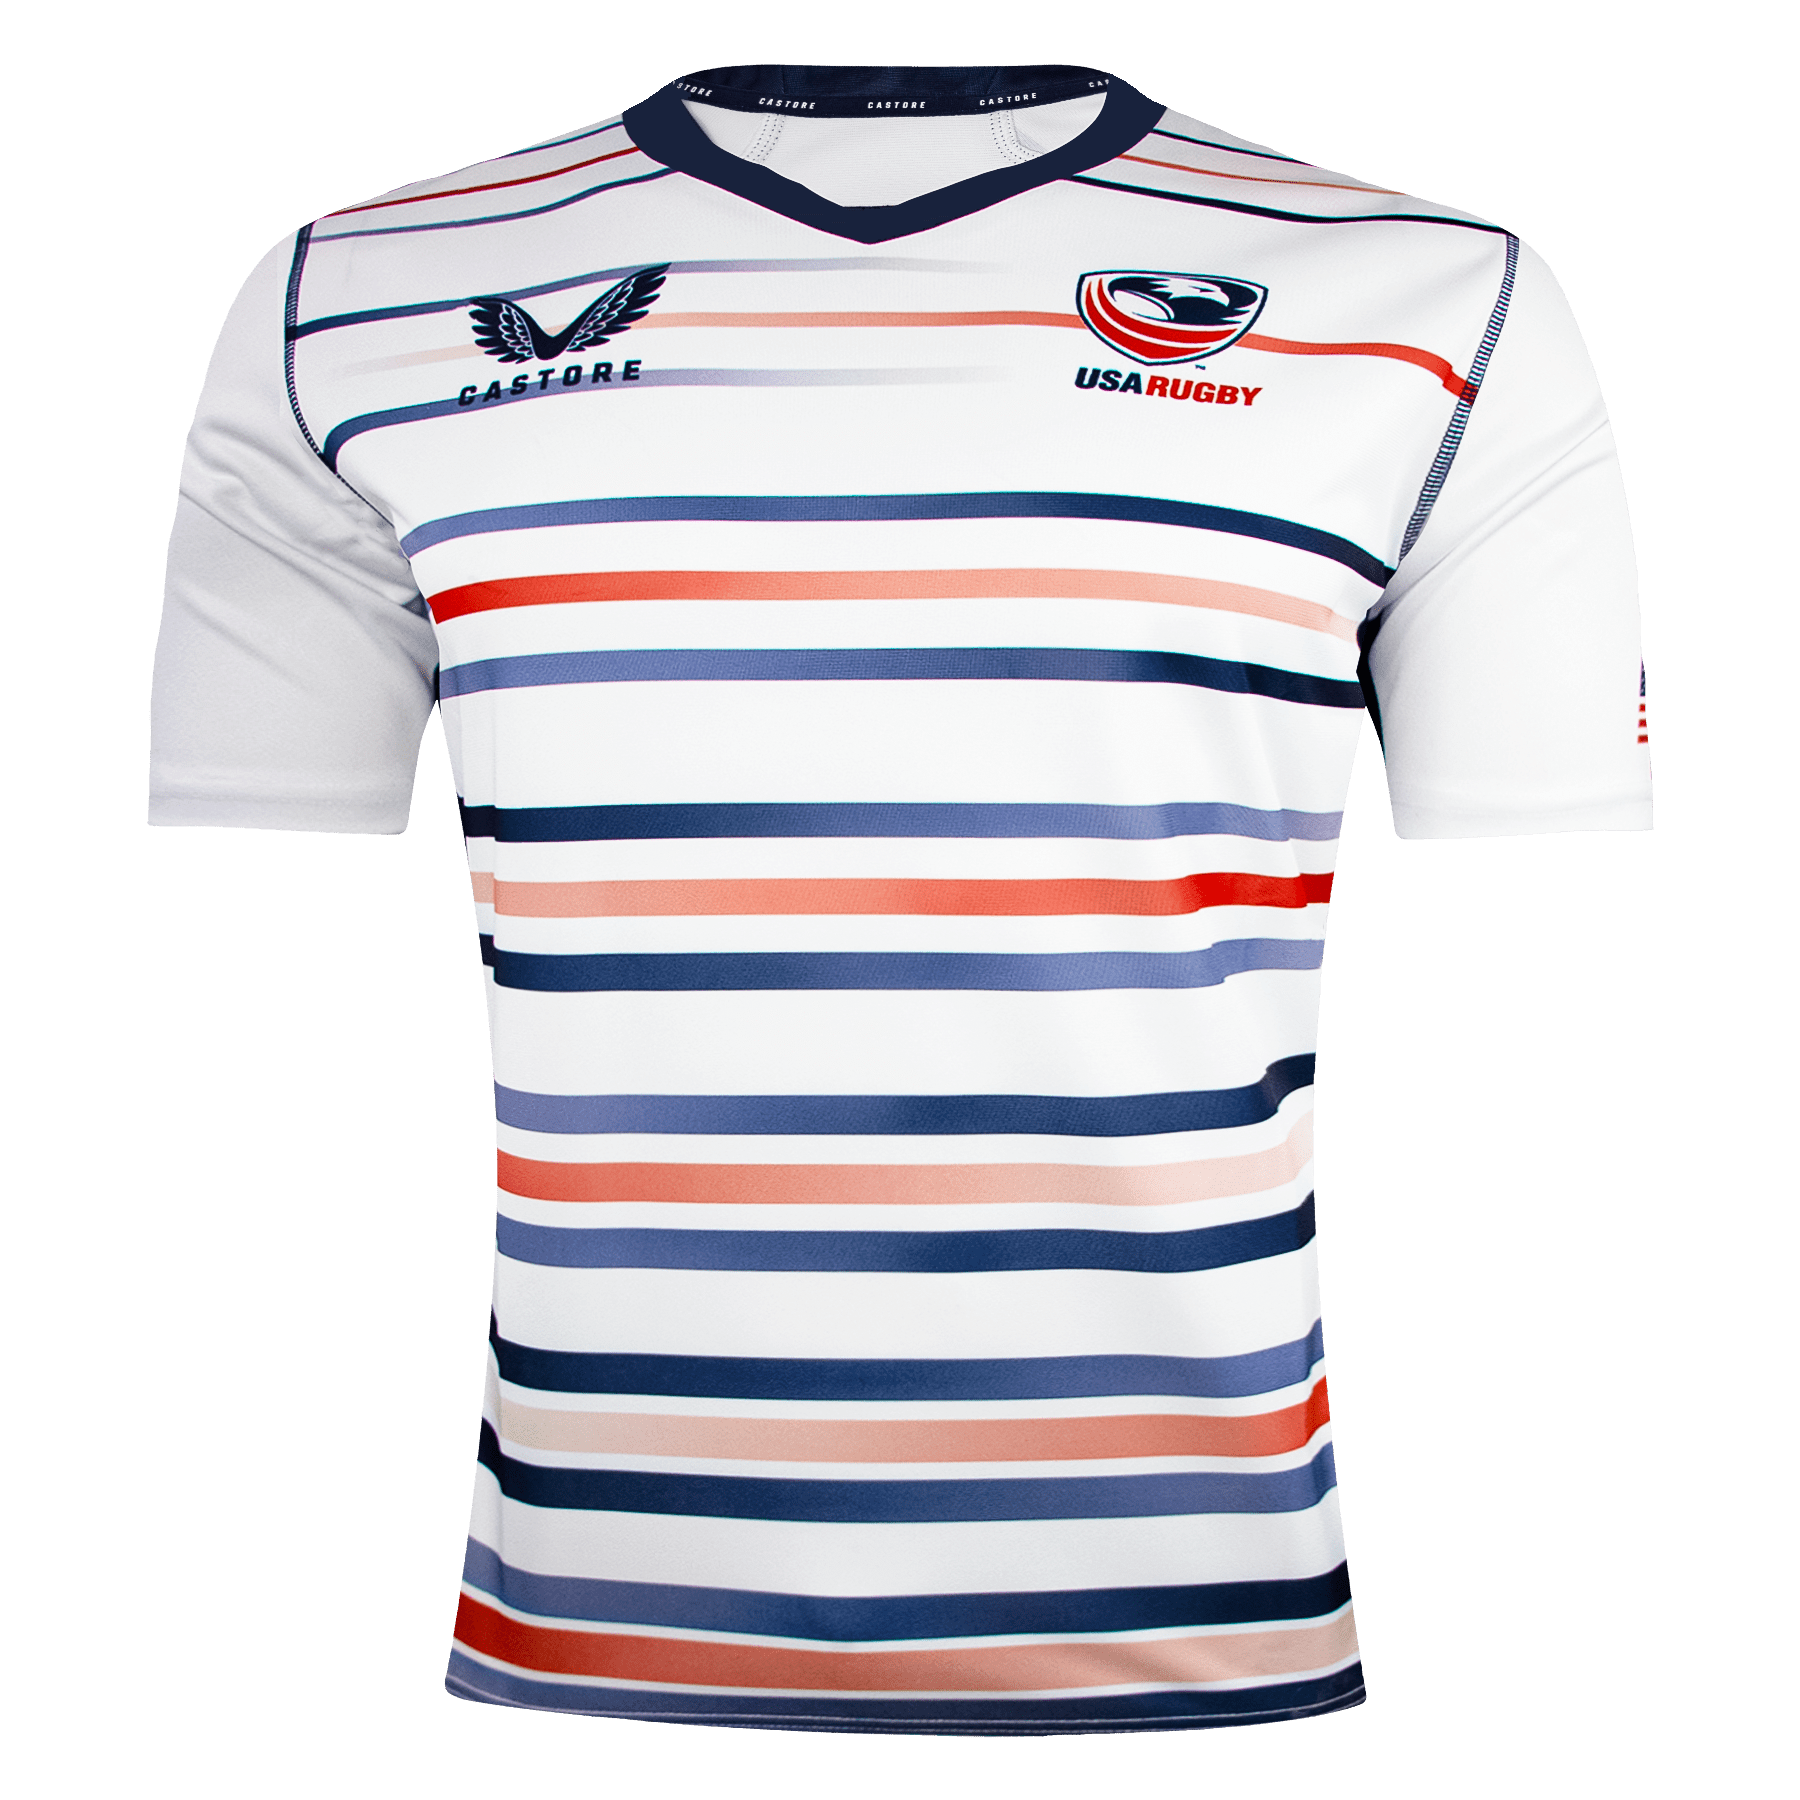 USA Rugby Mens Home Jersey 22/23 by Castore